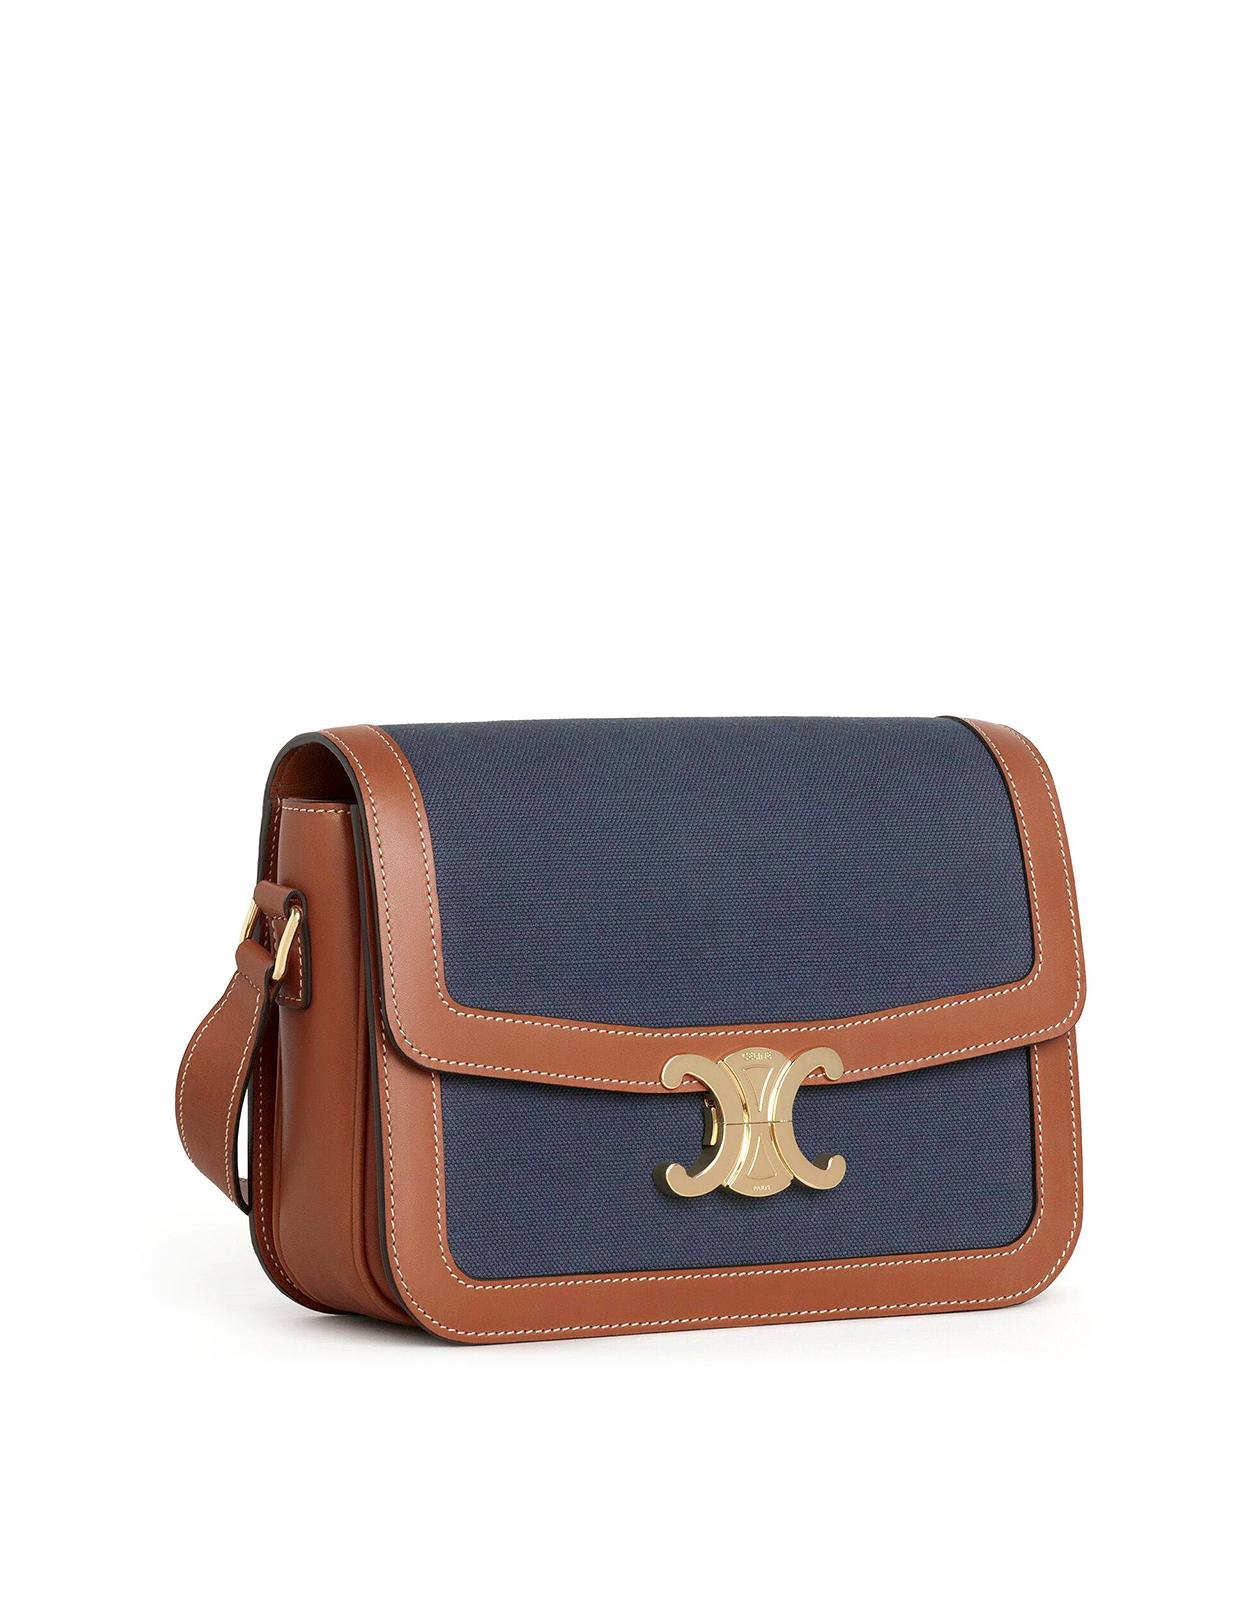 Celine Leather Medium Triomphe Bag In Textile And Calfskin in Navy/Tan ...